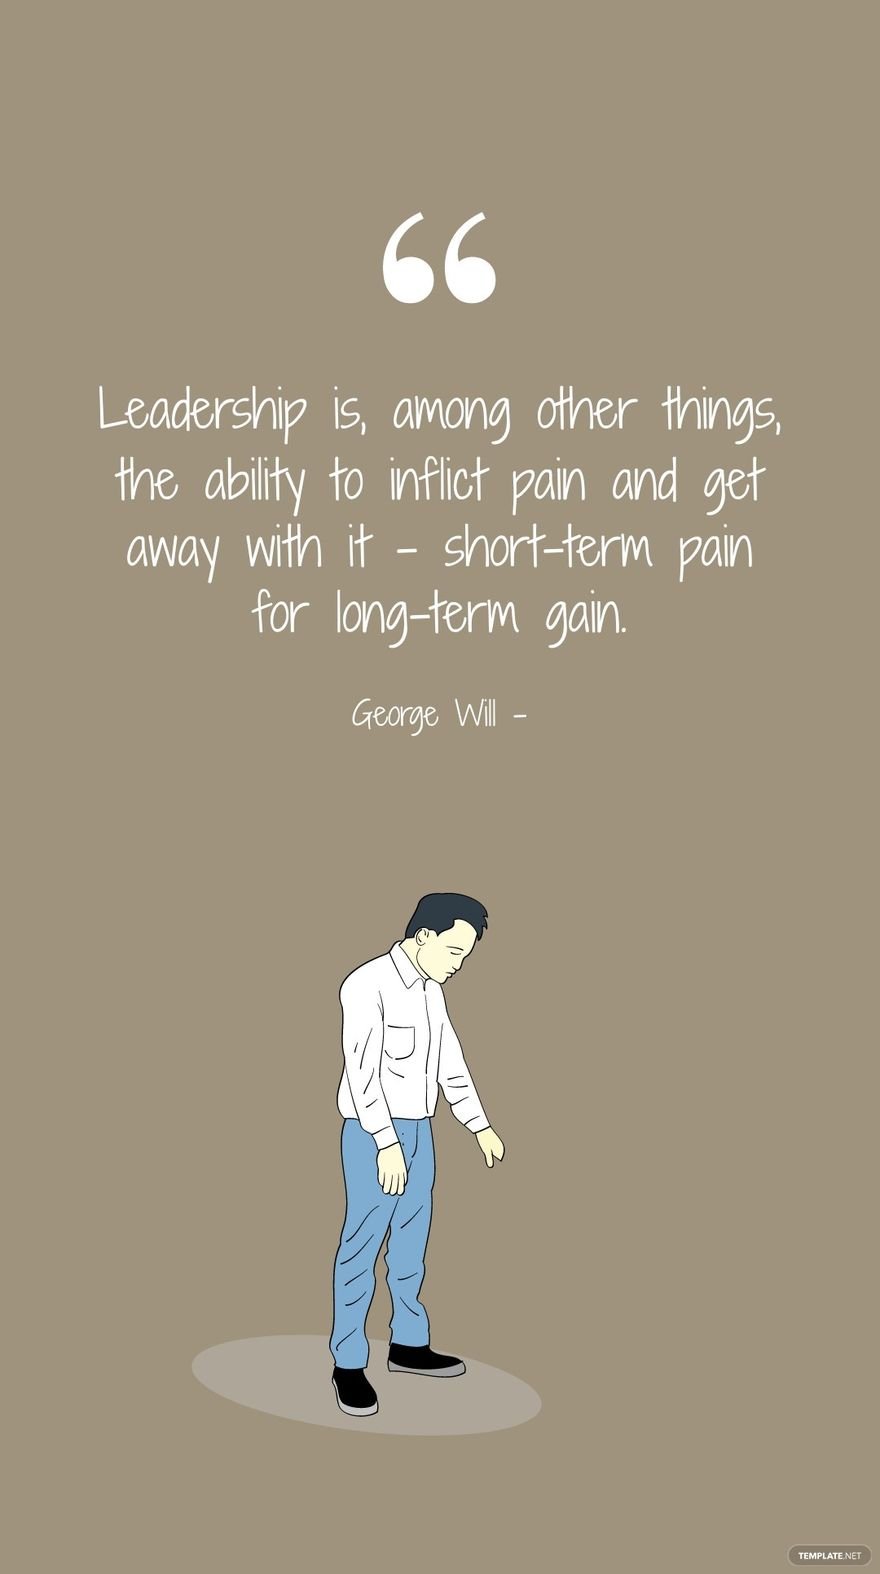 George Will - Leadership is, among other things, the ability to inflict pain and get away with it - short-term pain for long-term gain.